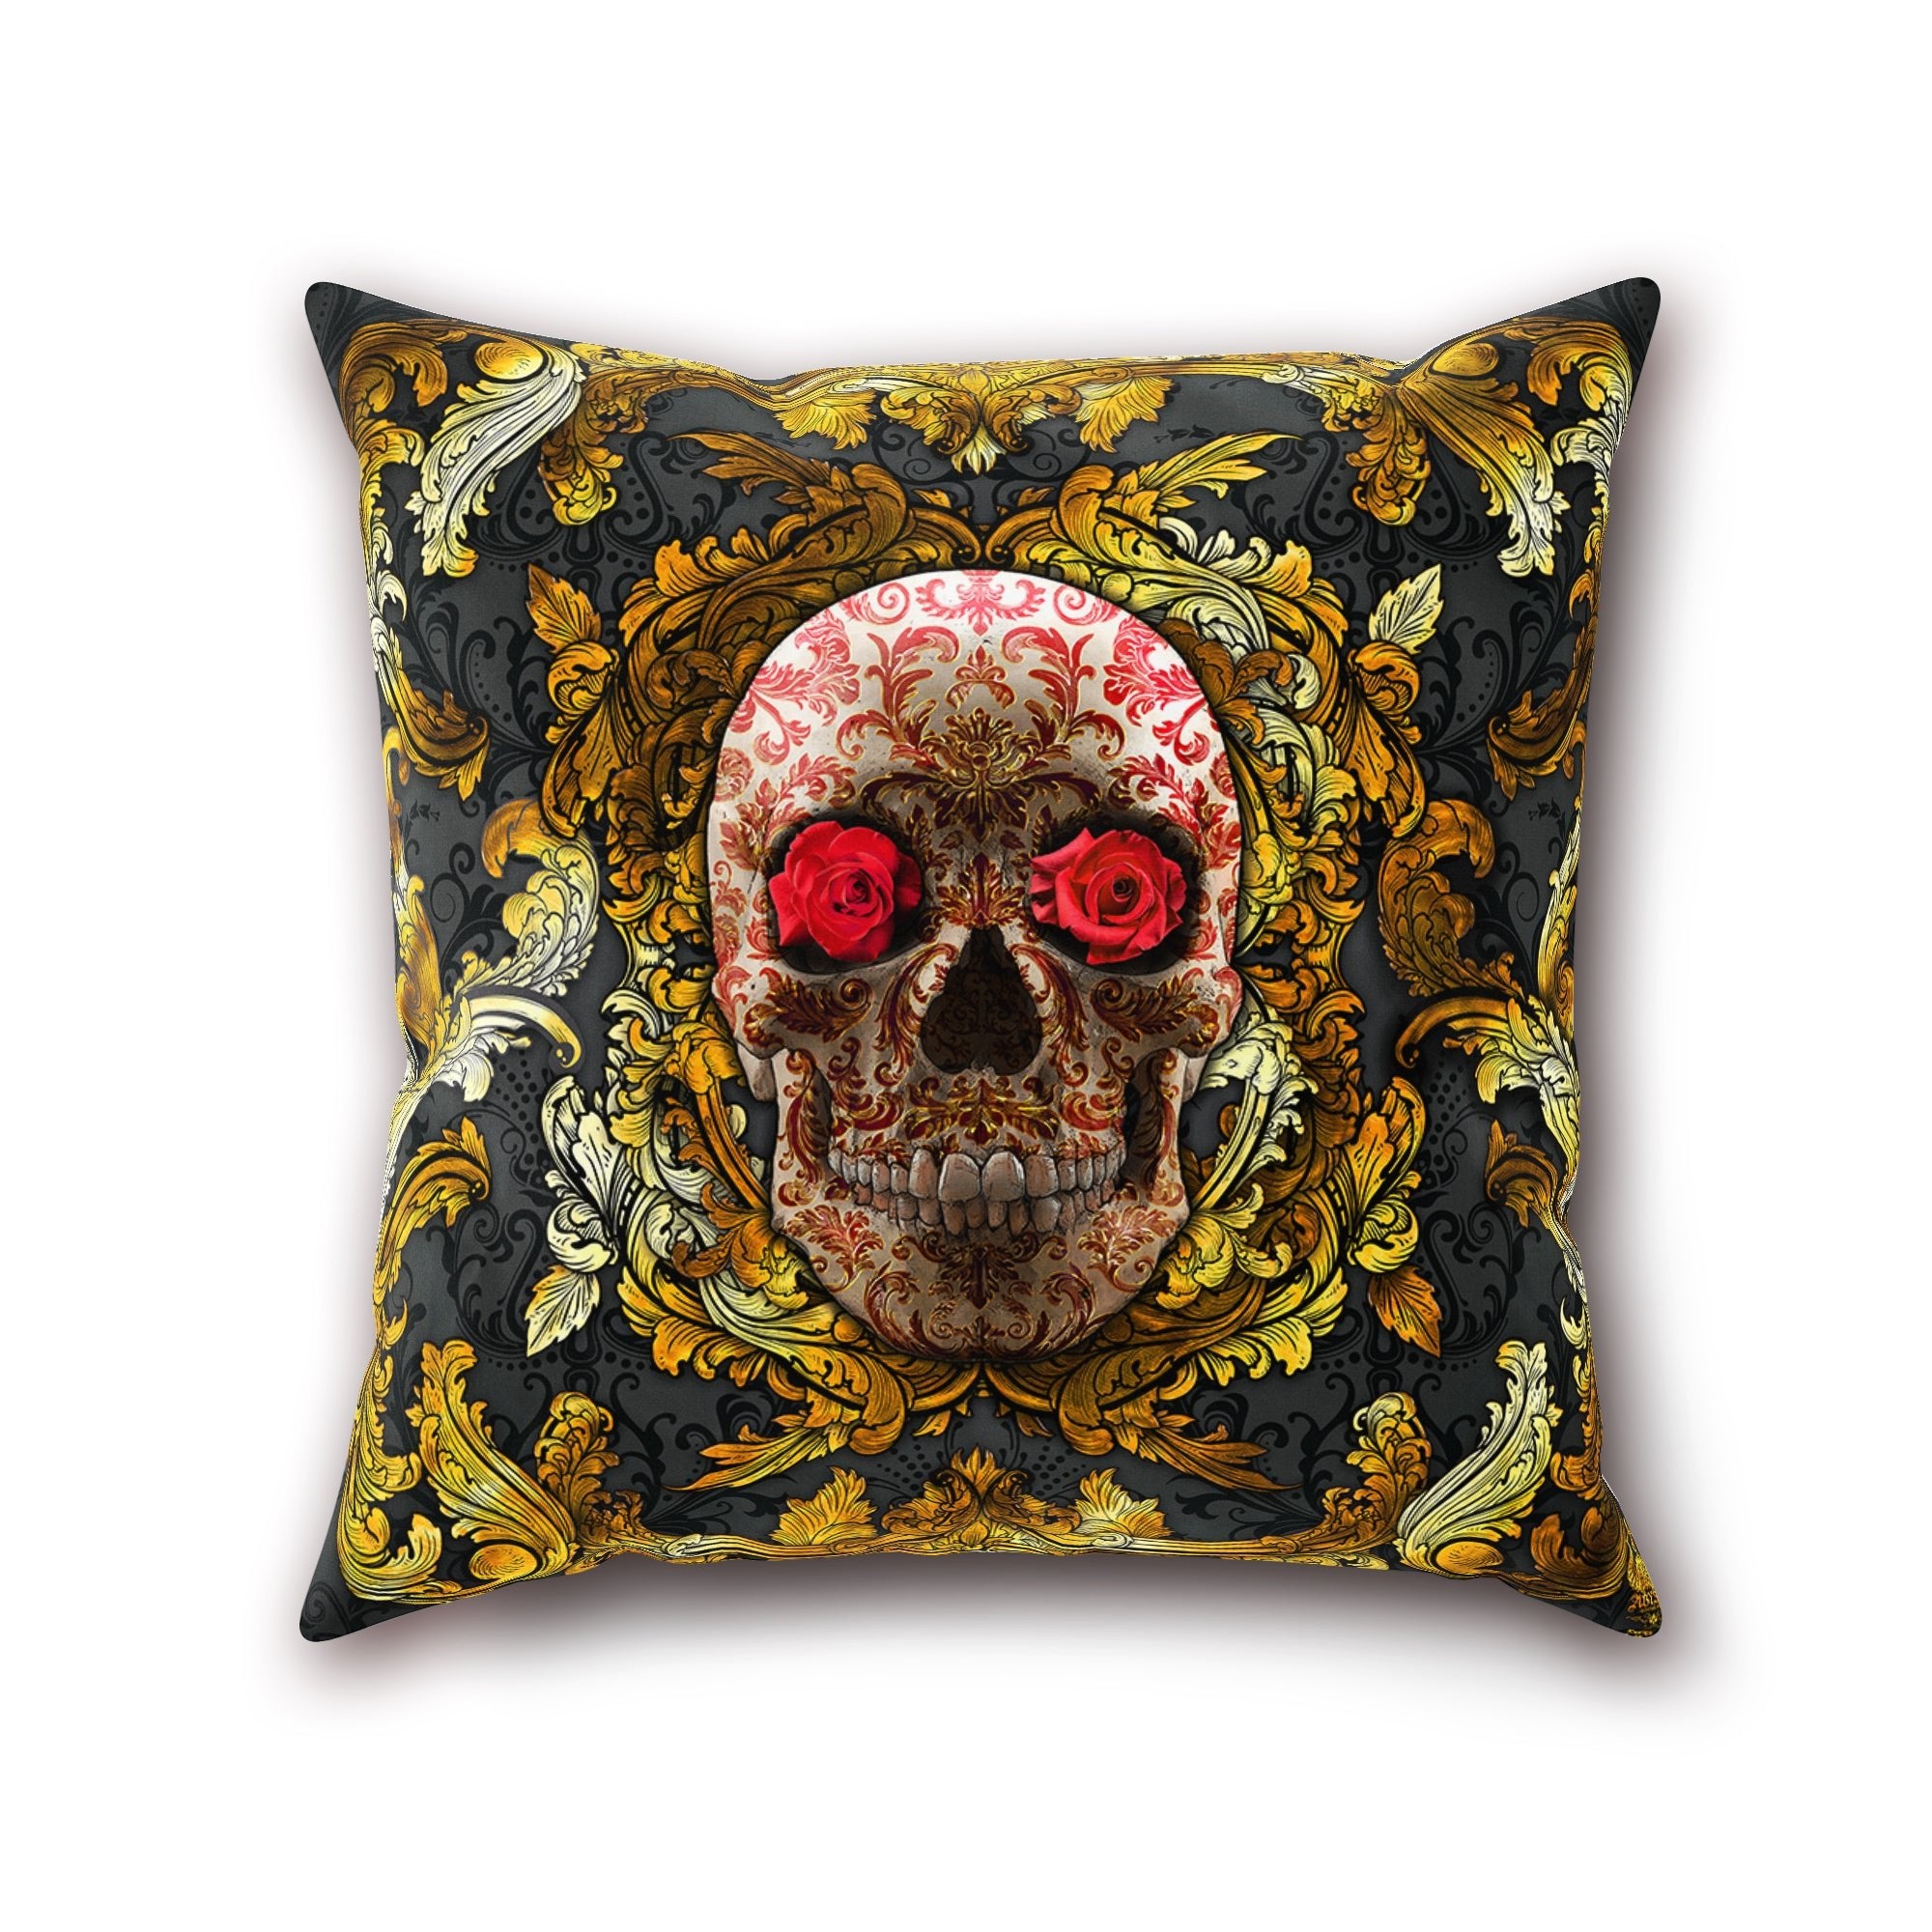 Gold Skull Throw Pillow, Decorative Accent Pillow, Square Cushion Cover, Vintage, Baroque Decor, Macabre Art, Alternative Home - Black and Red, 2 Colors - Abysm Internal